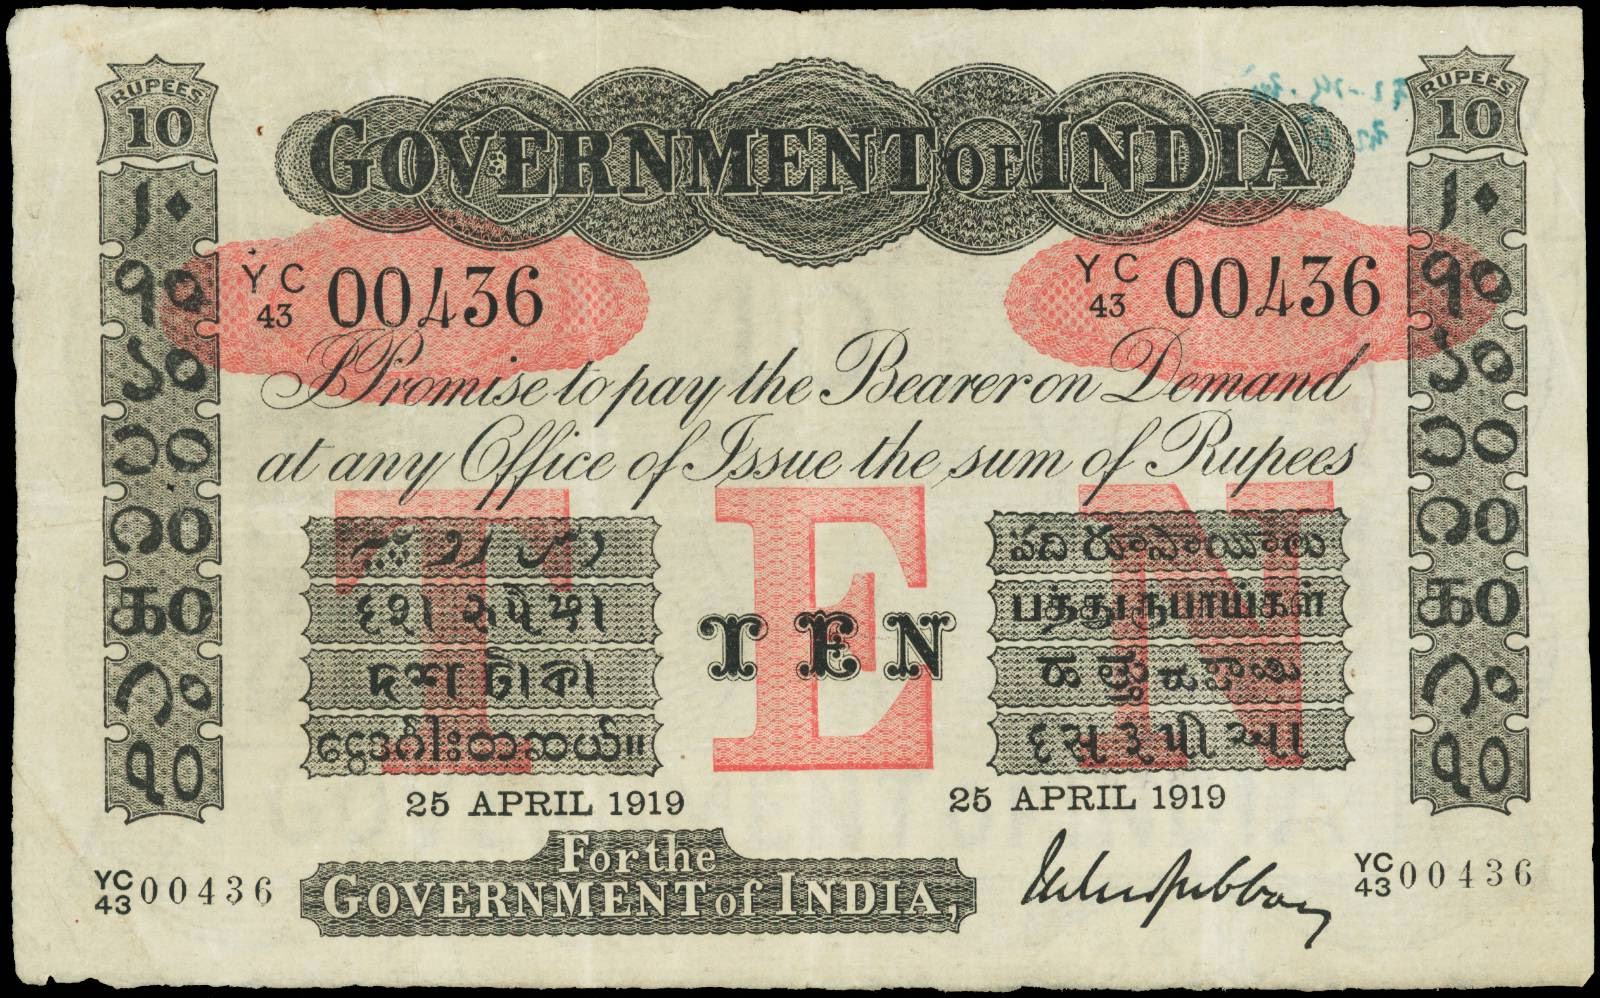 British India Notes 10 Rupees 1919 Government of India